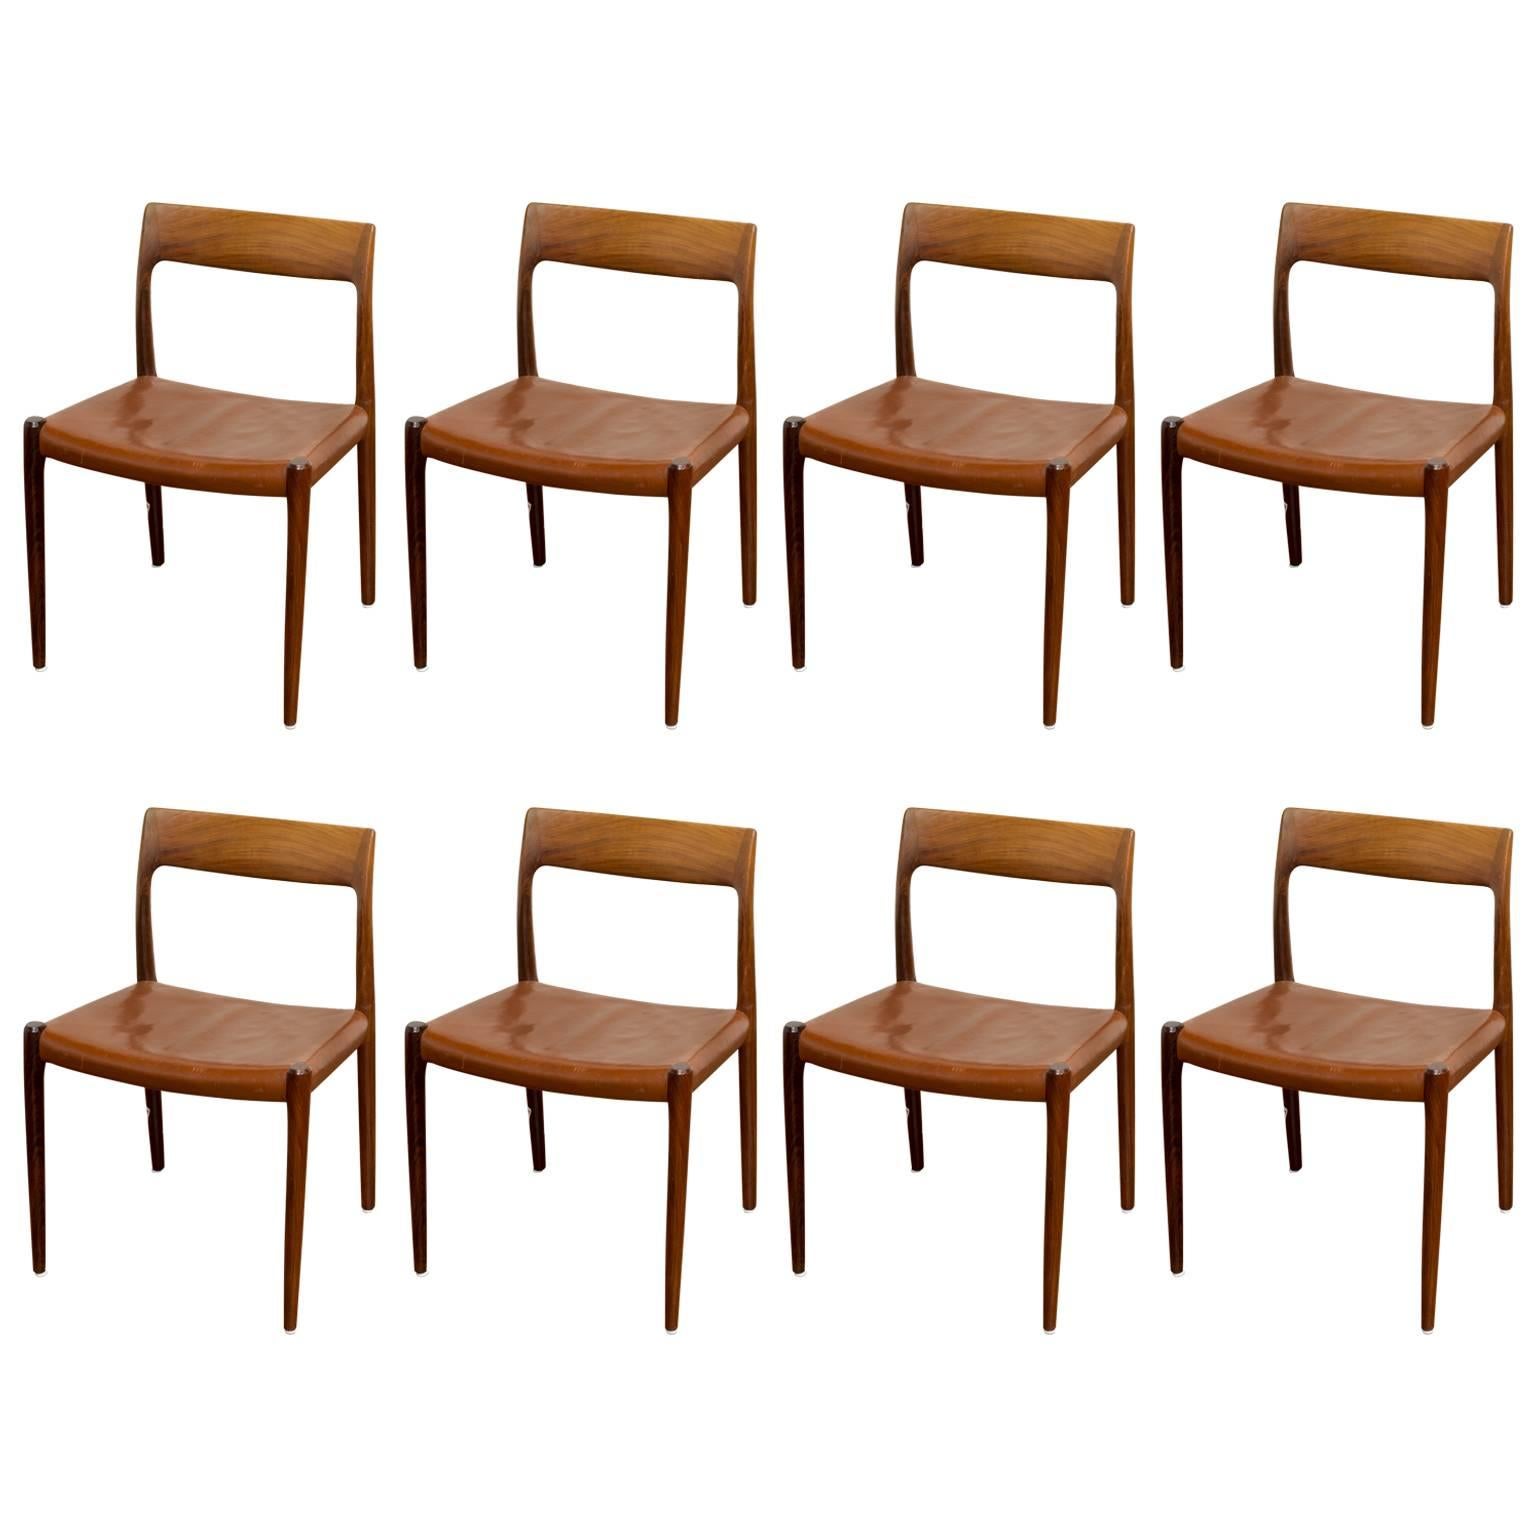 Dining Chairs with Solid Rosewood Frame, Seats with Original Brown Leather